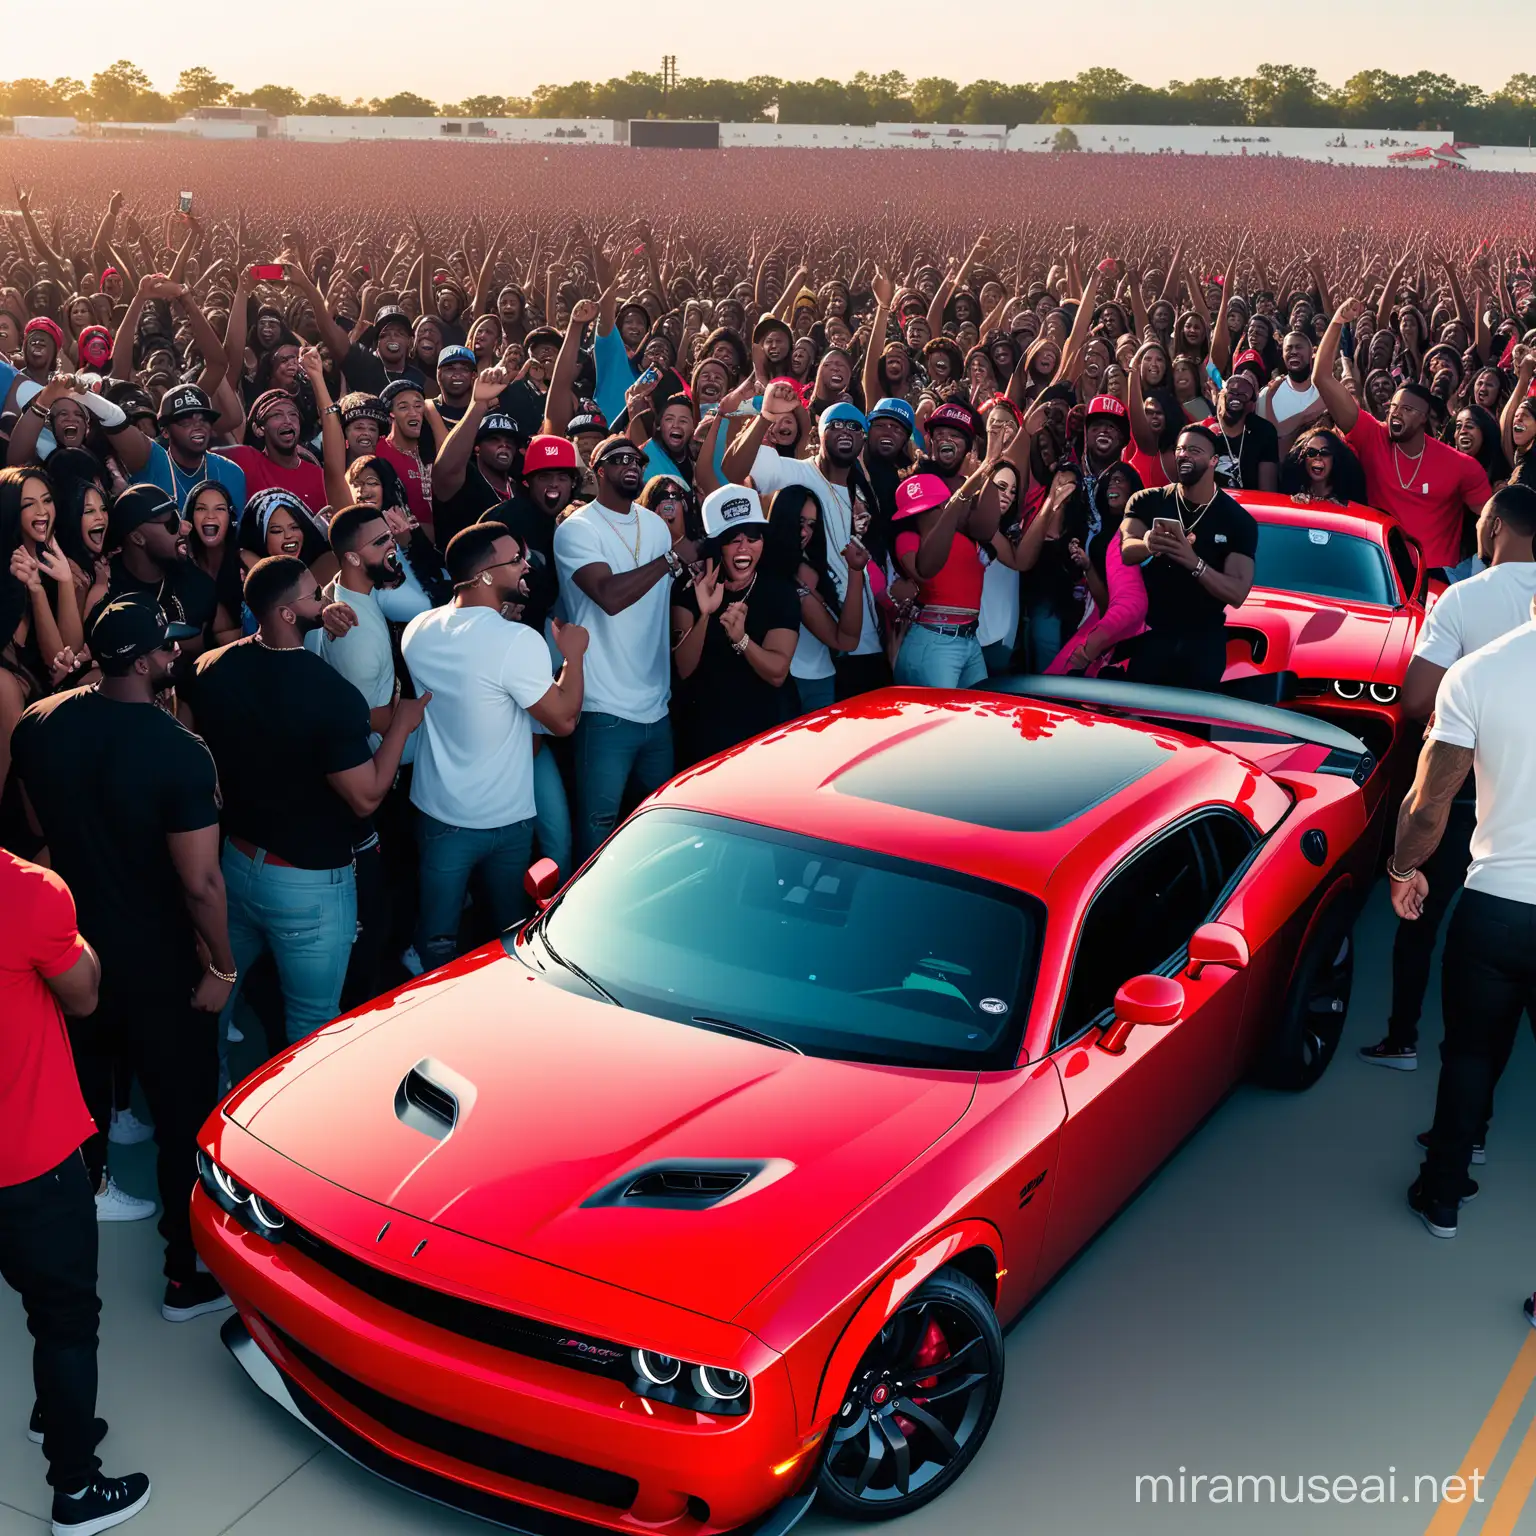 empty field, Afroamerican college students, men, women, partying, sexy, fine, blue 2024 Dodge Challenger hellcat with an Afroamerican crowd around in 64k UHD capturing the adrenaline-fueled excitement of the rap and party lifestyle IN 2013